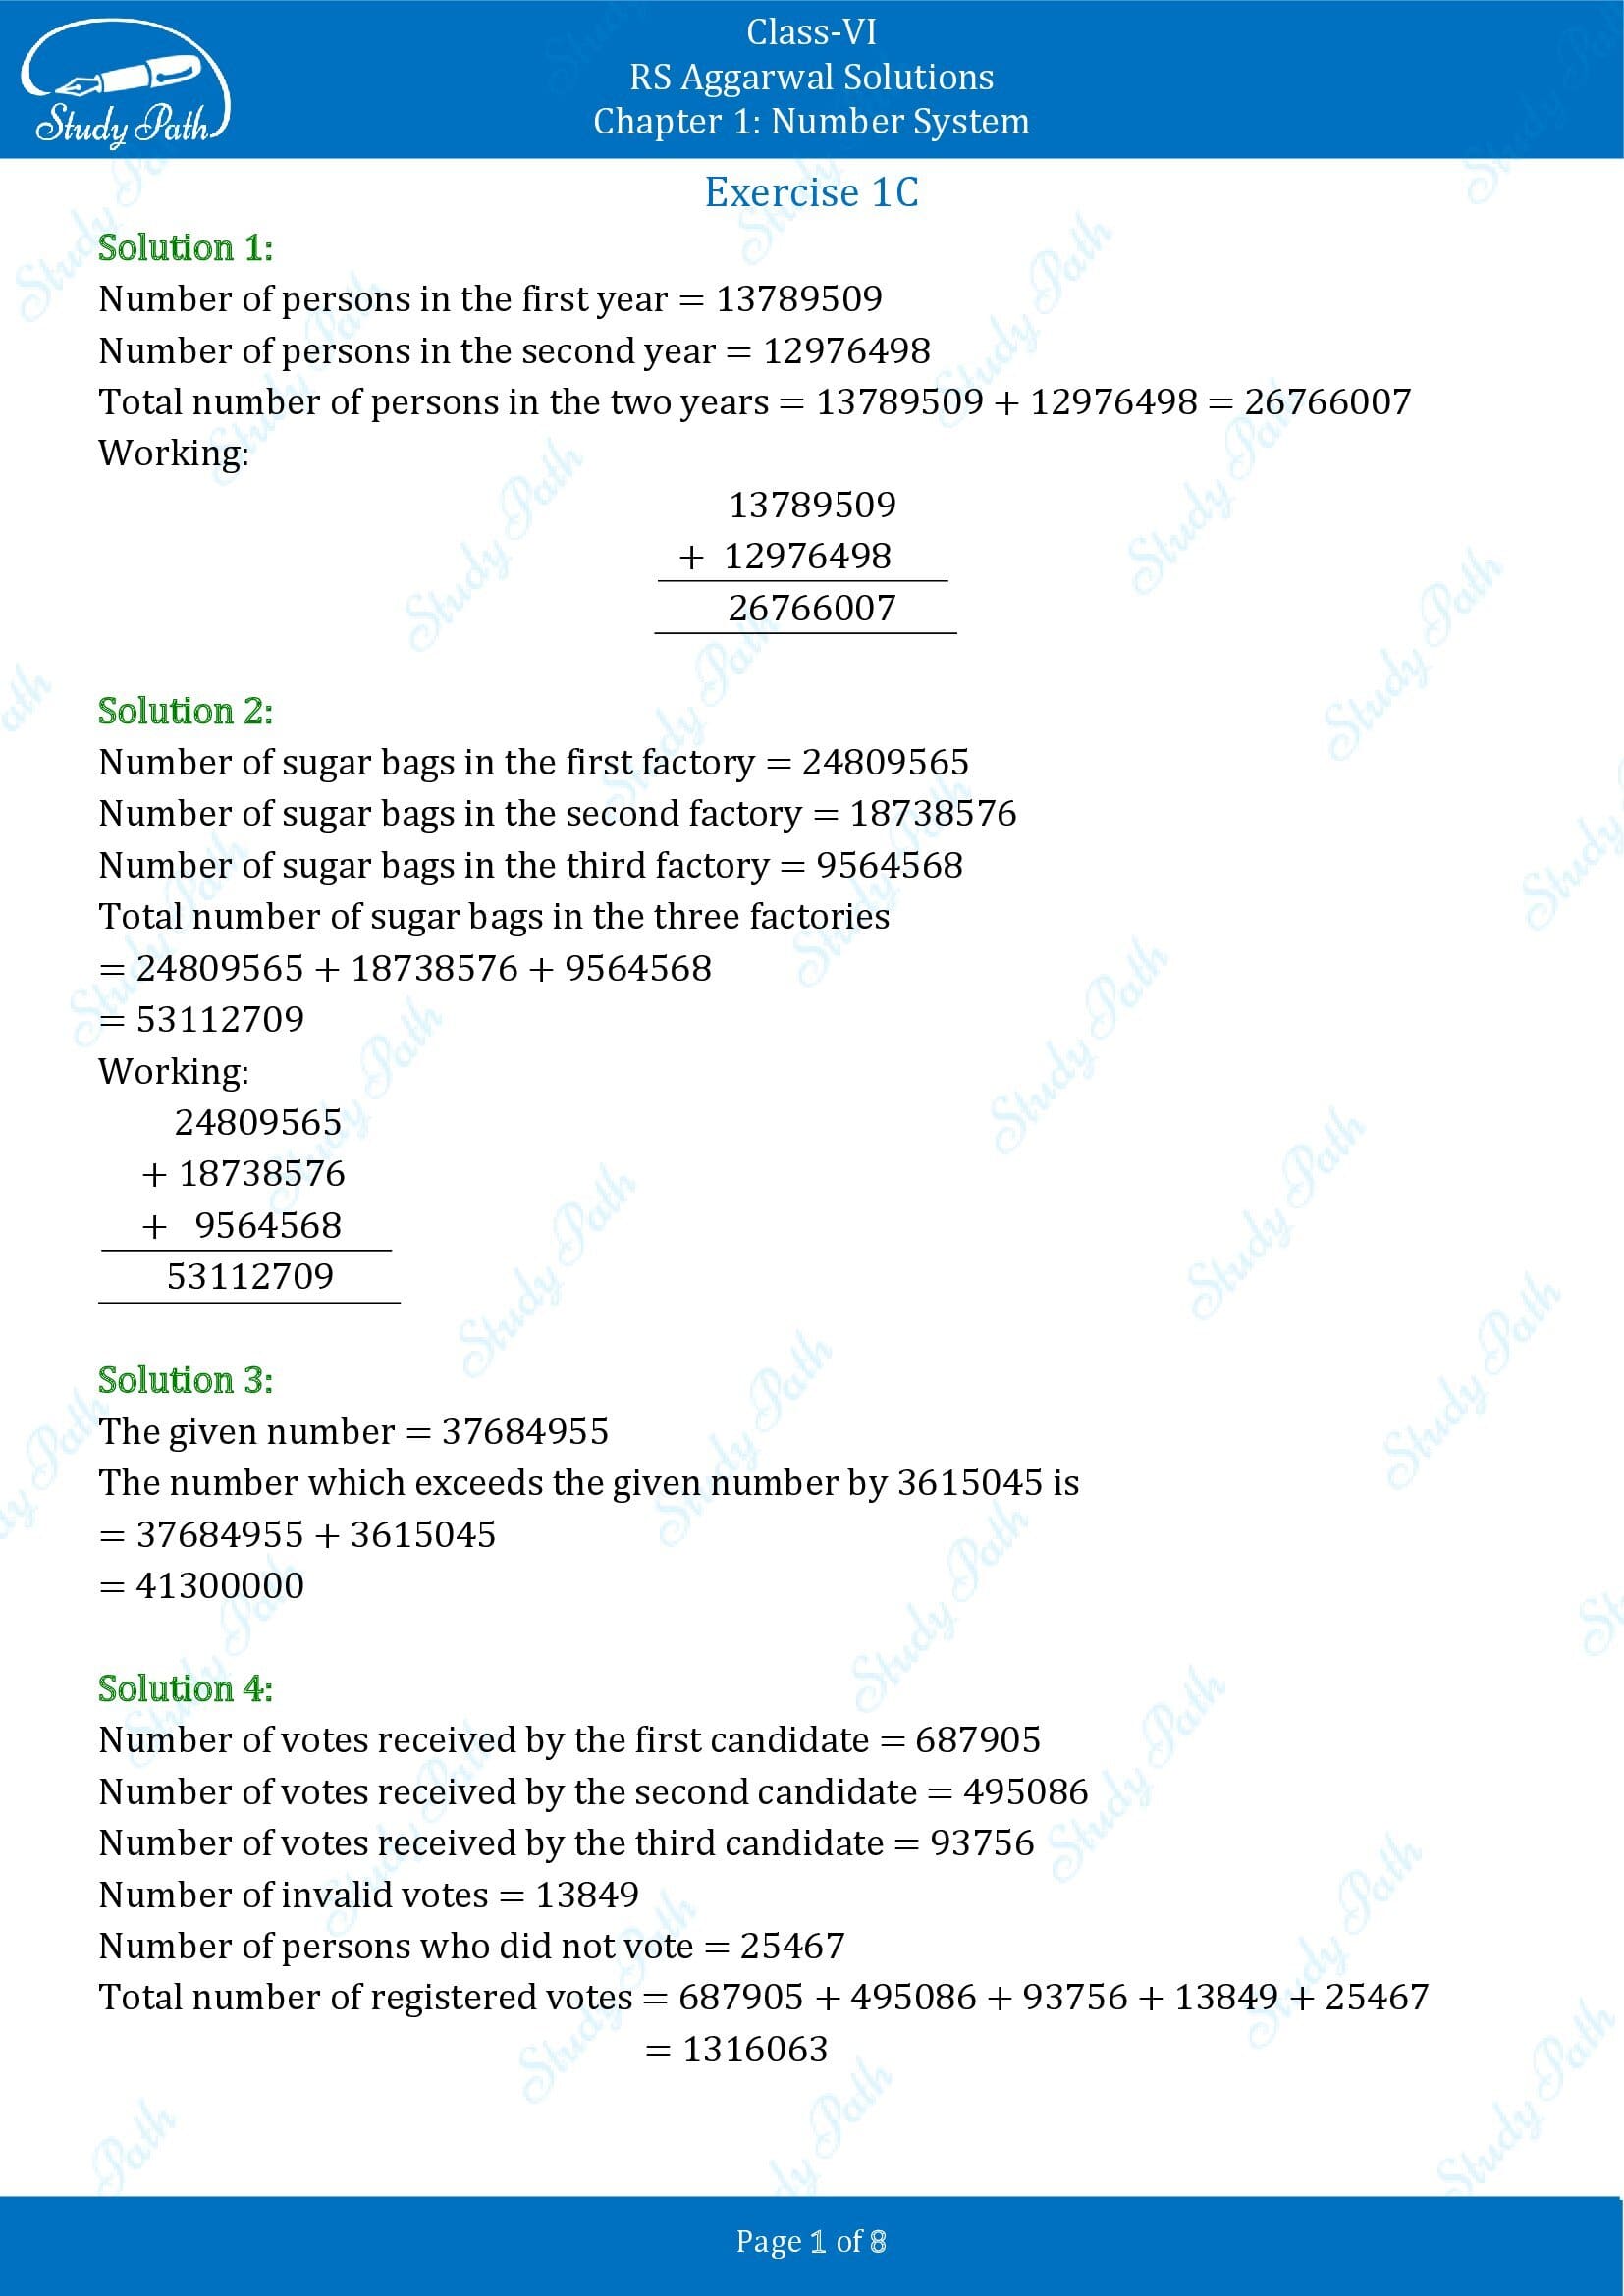 RS Aggarwal Solutions Class 6 Chapter 1 Number System Exercise 1C 00001